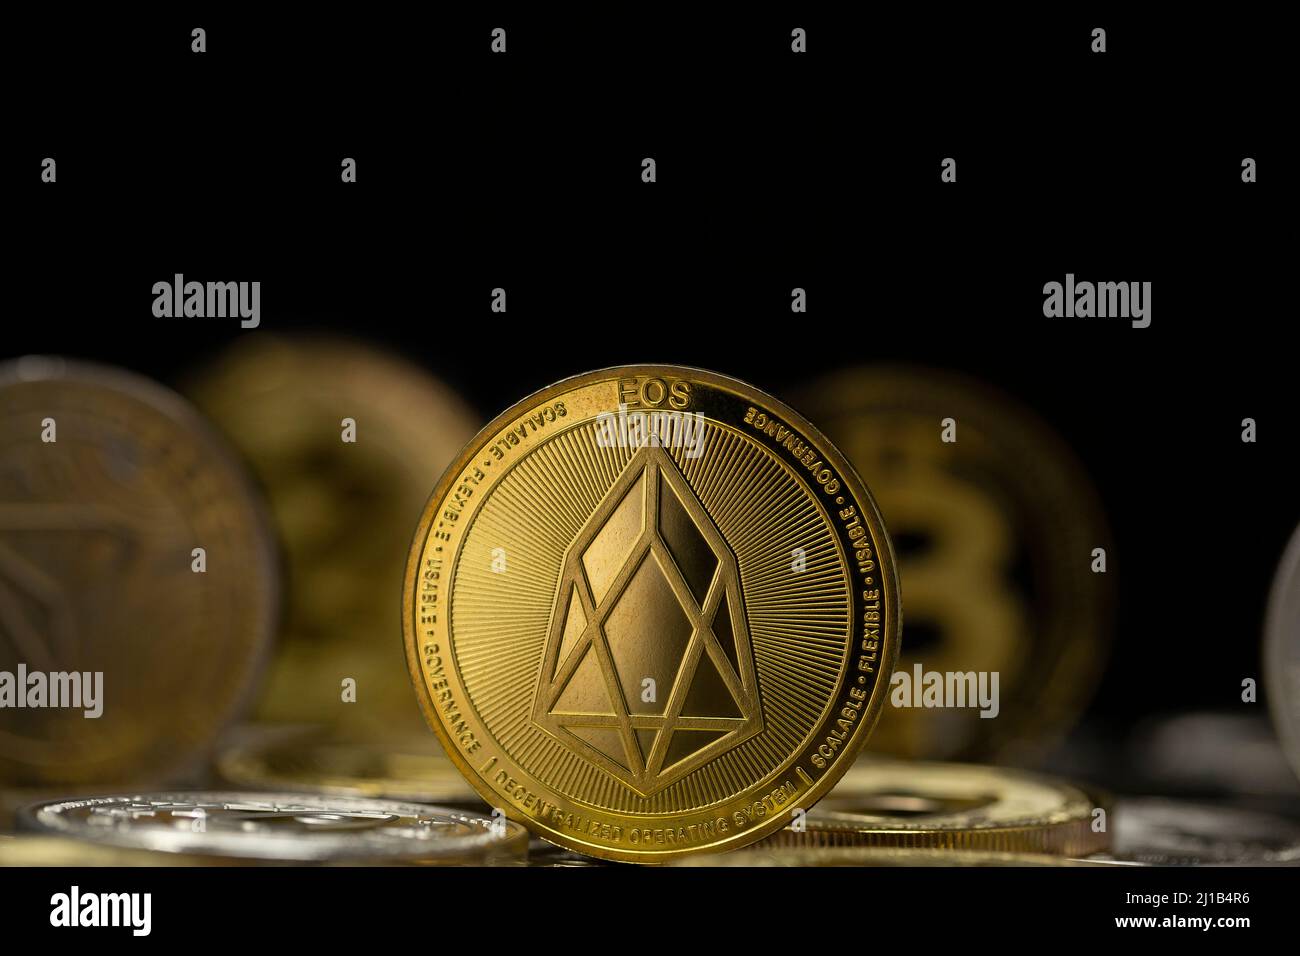 EOS cryptocurrency physical coin placed on variety of altcoins in the black background Stock Photo